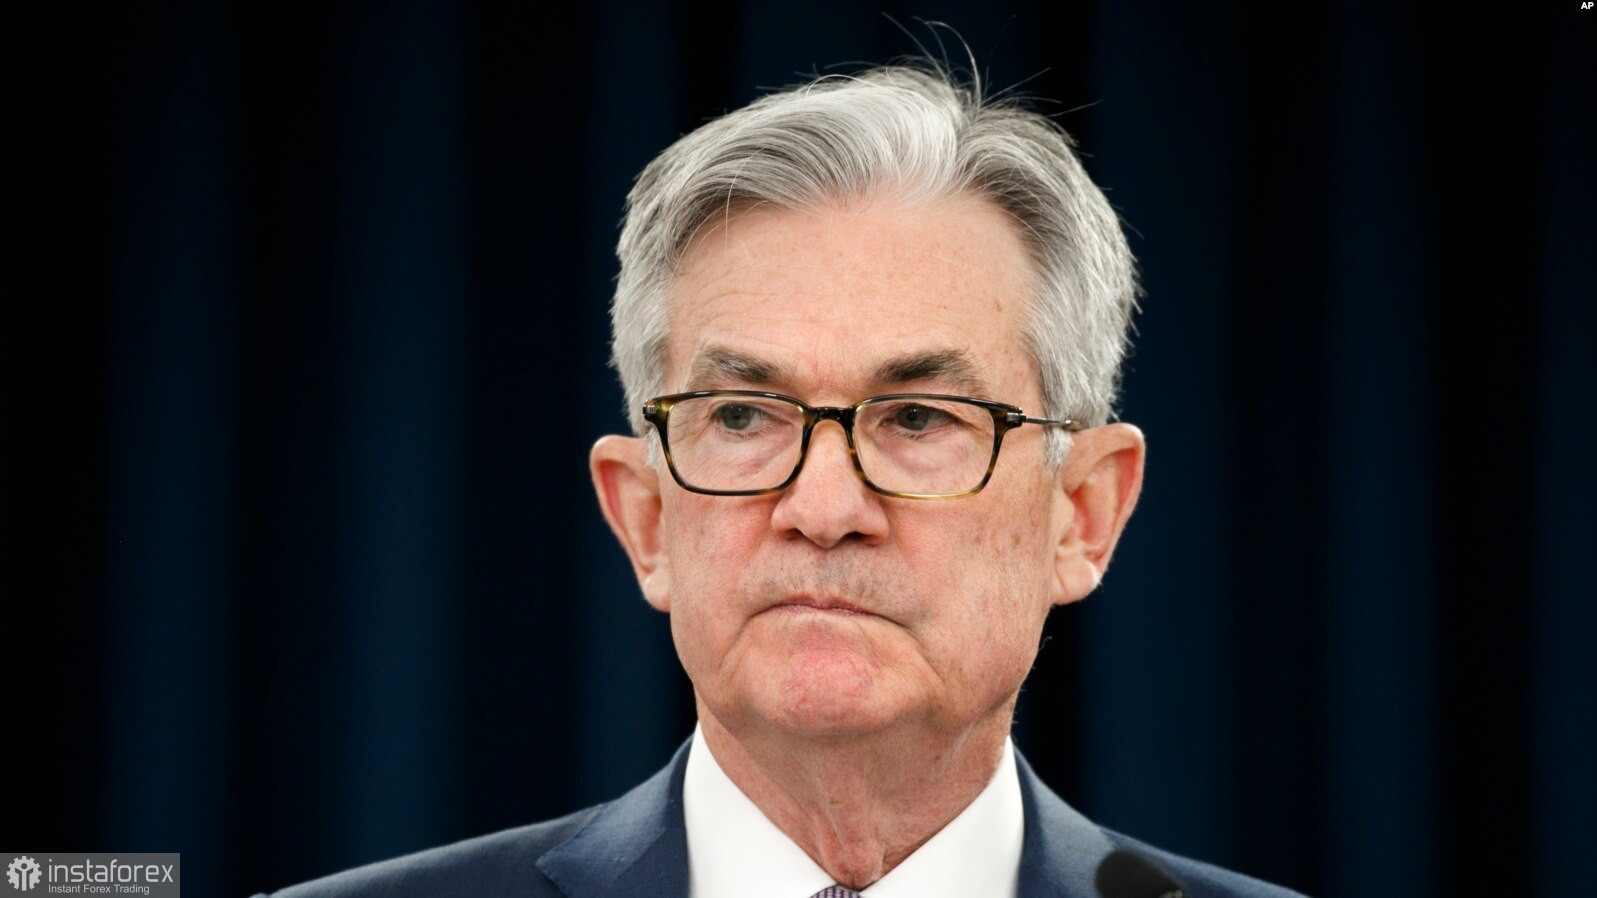 Fed rate hike: January or March?